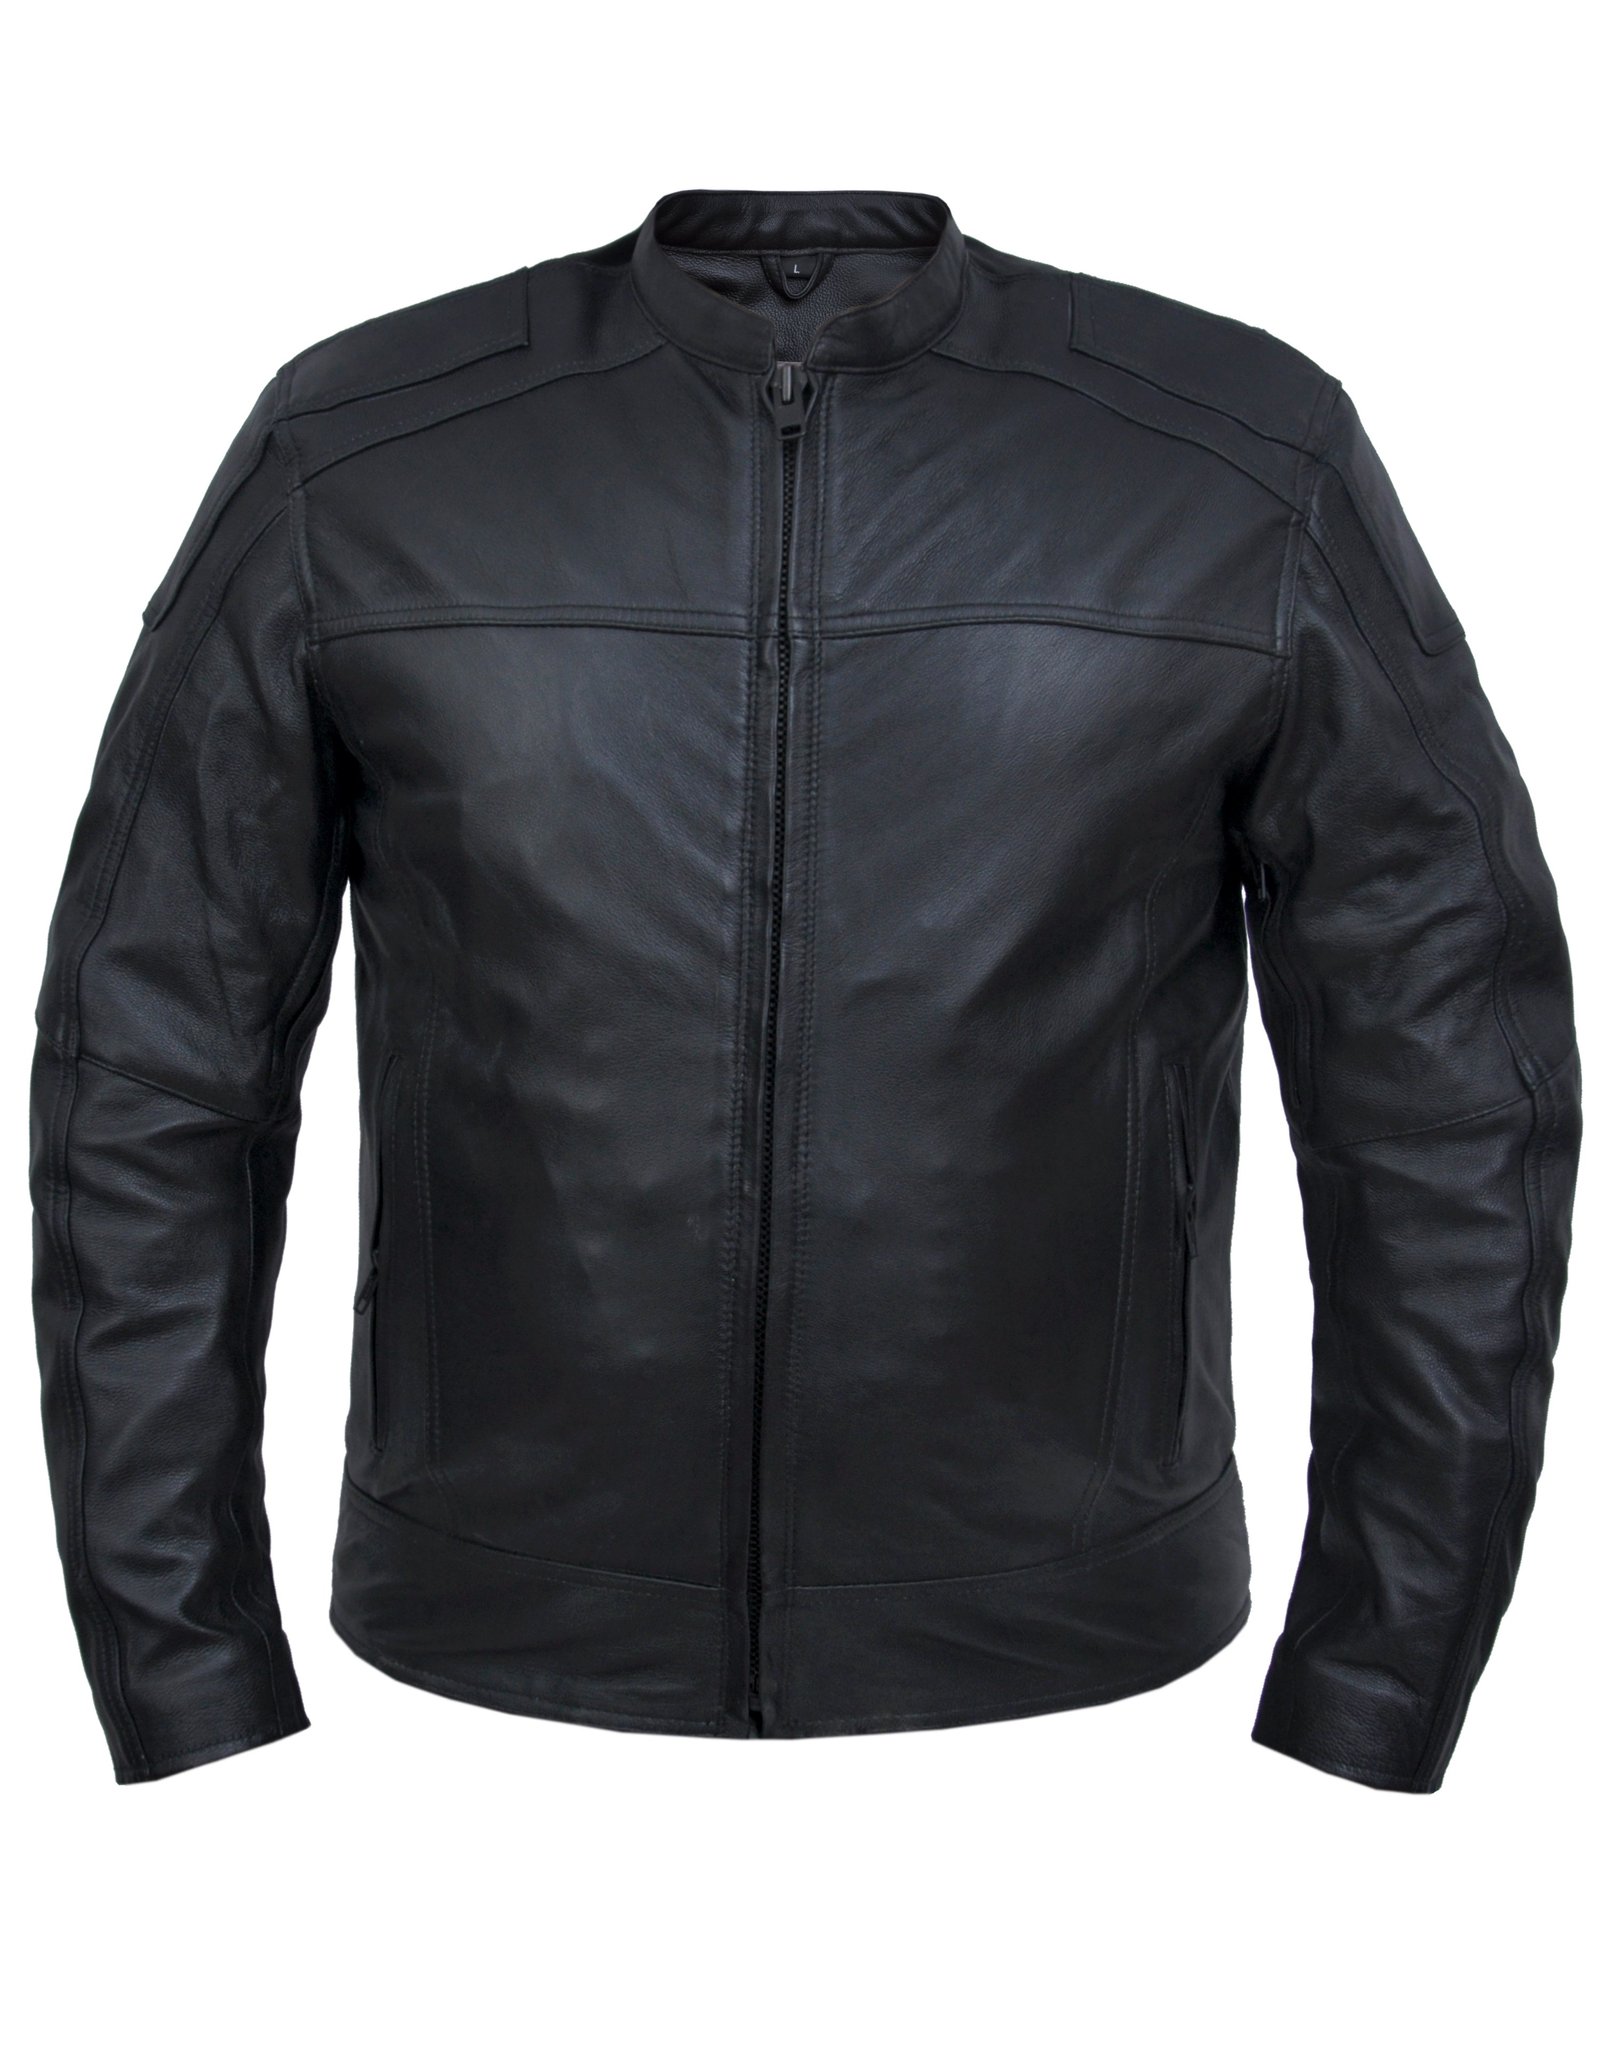 Leather Motorcycle Jacket - Men's - Light Weight - 6624-NG-UN